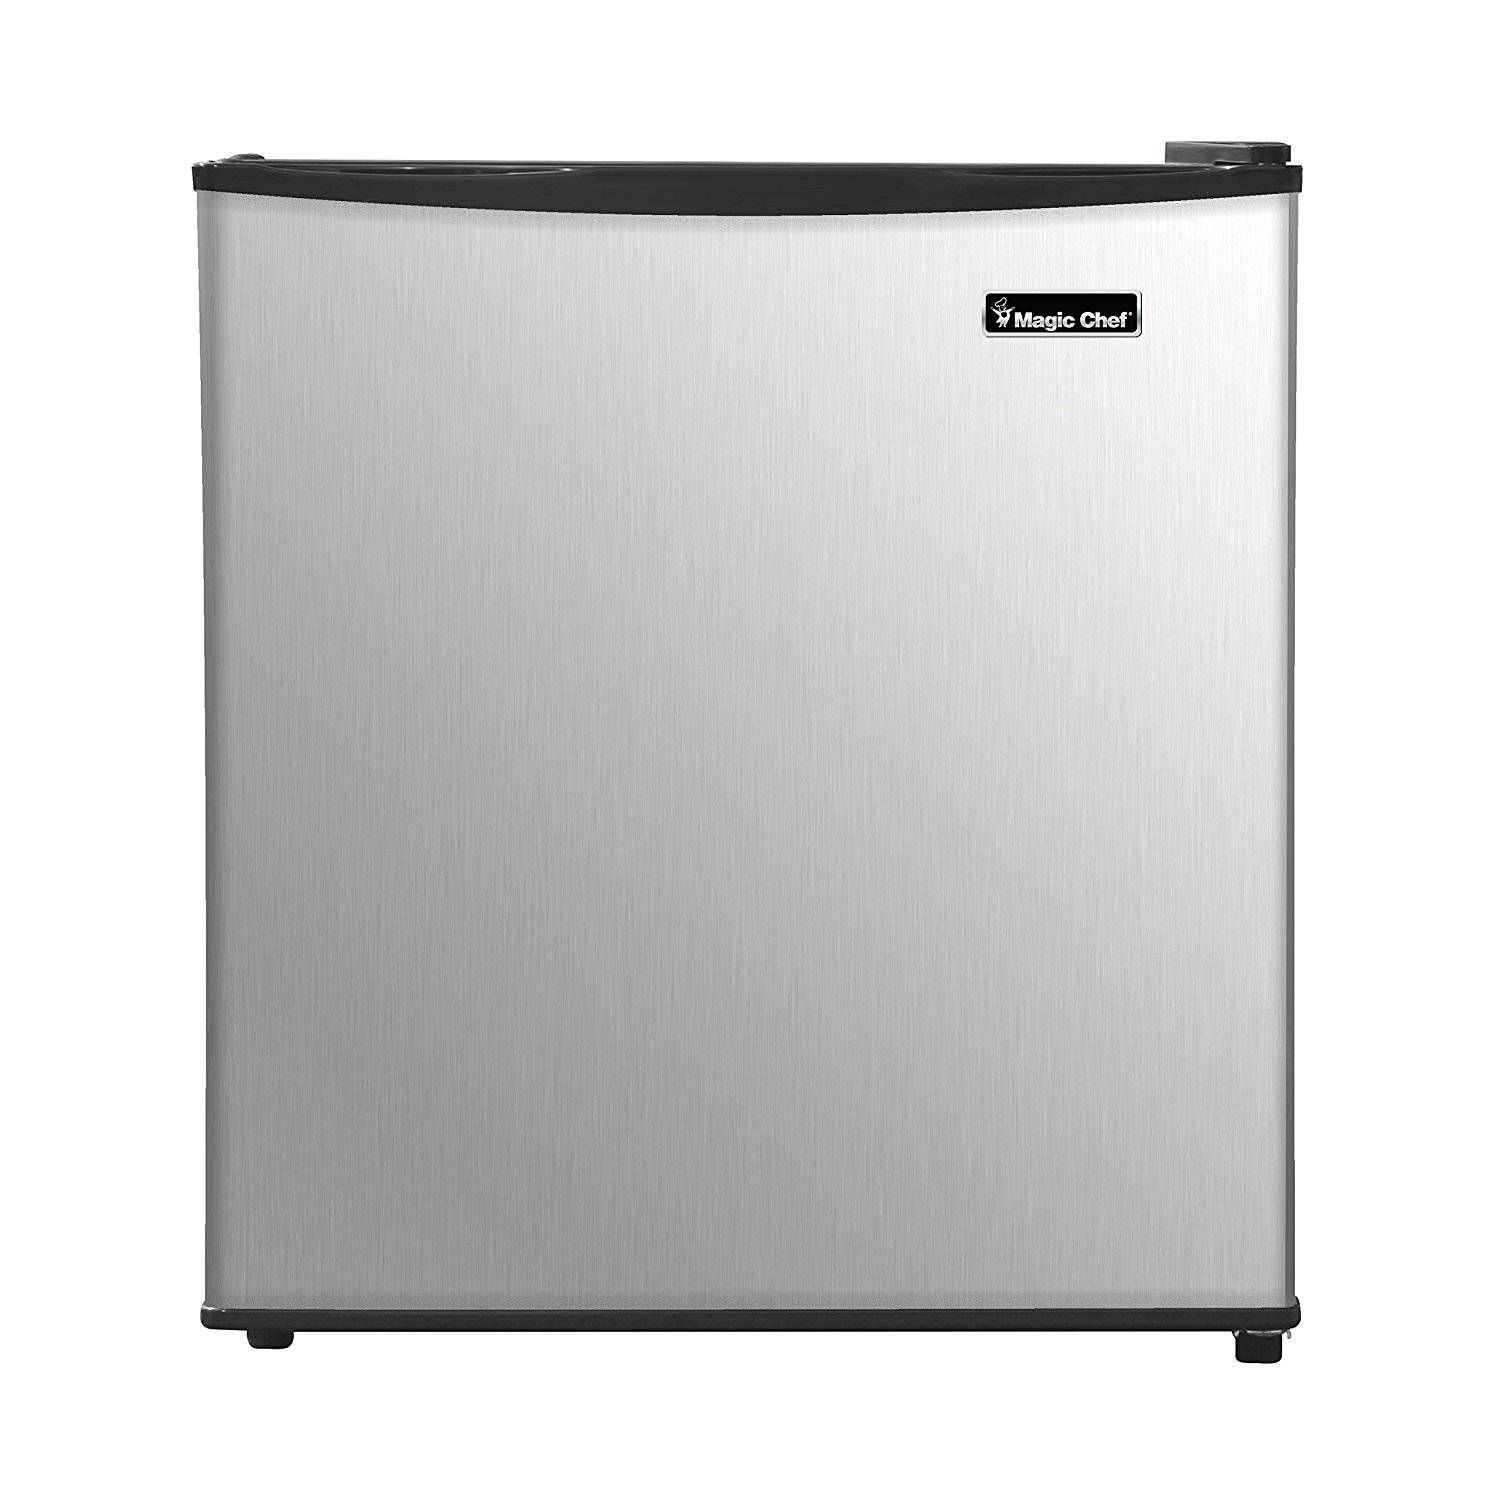 Magic Chef MCAR170SE2 Energy Star 1.7 Cu. ft. Mini All-Refrigerator with Stainless Door Compact, Silver